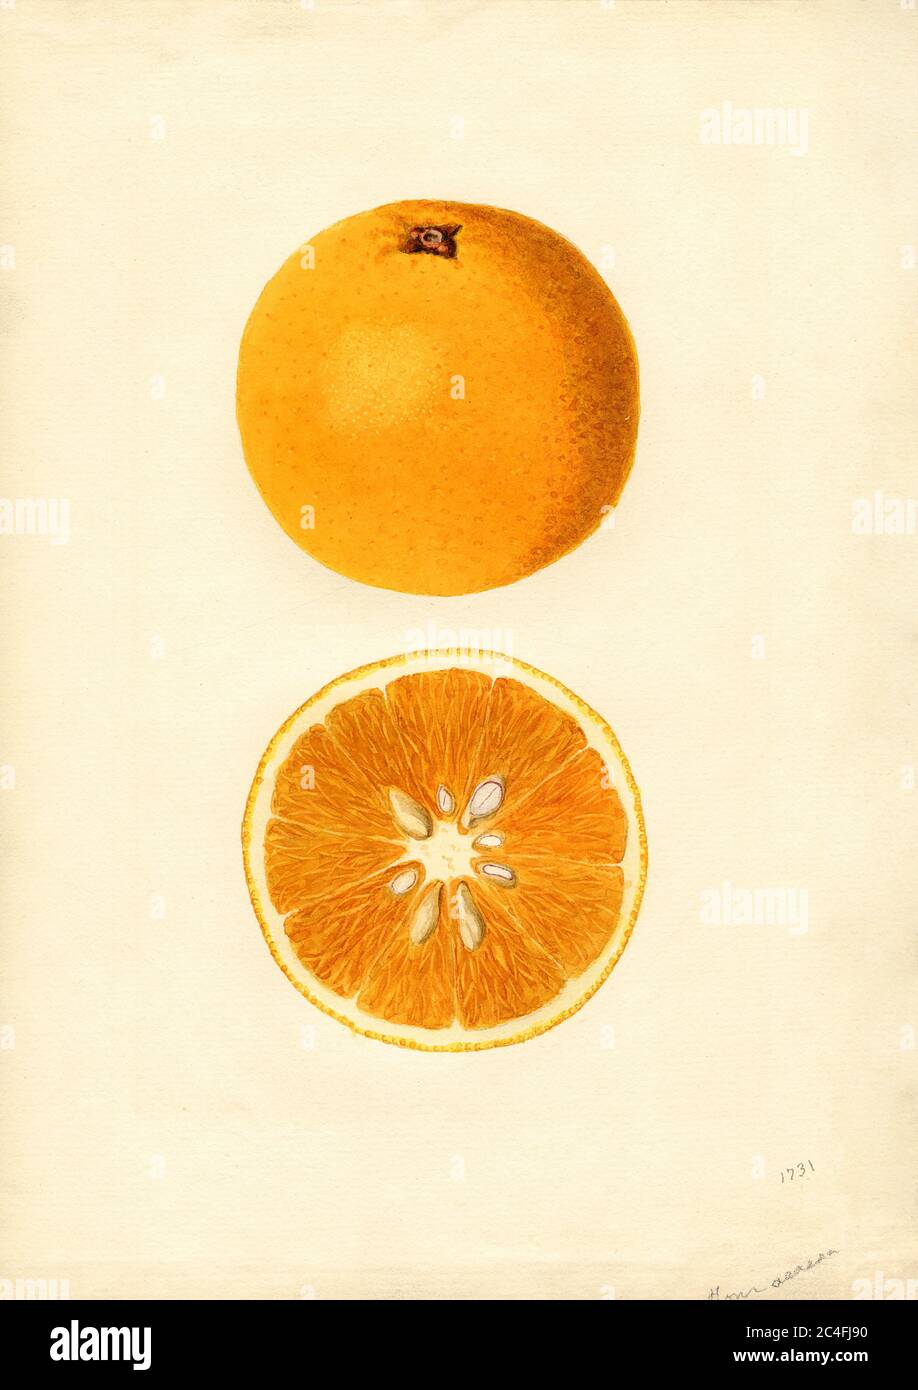 Oranges, Homosassa variety, Citrus sinensis, Orlando, Orange County, Florida, USA, Watercolor Illustration by James Marion Shull, U.S. Department of Agriculture Pomological Watercolor Collection, 1937 Stock Photo